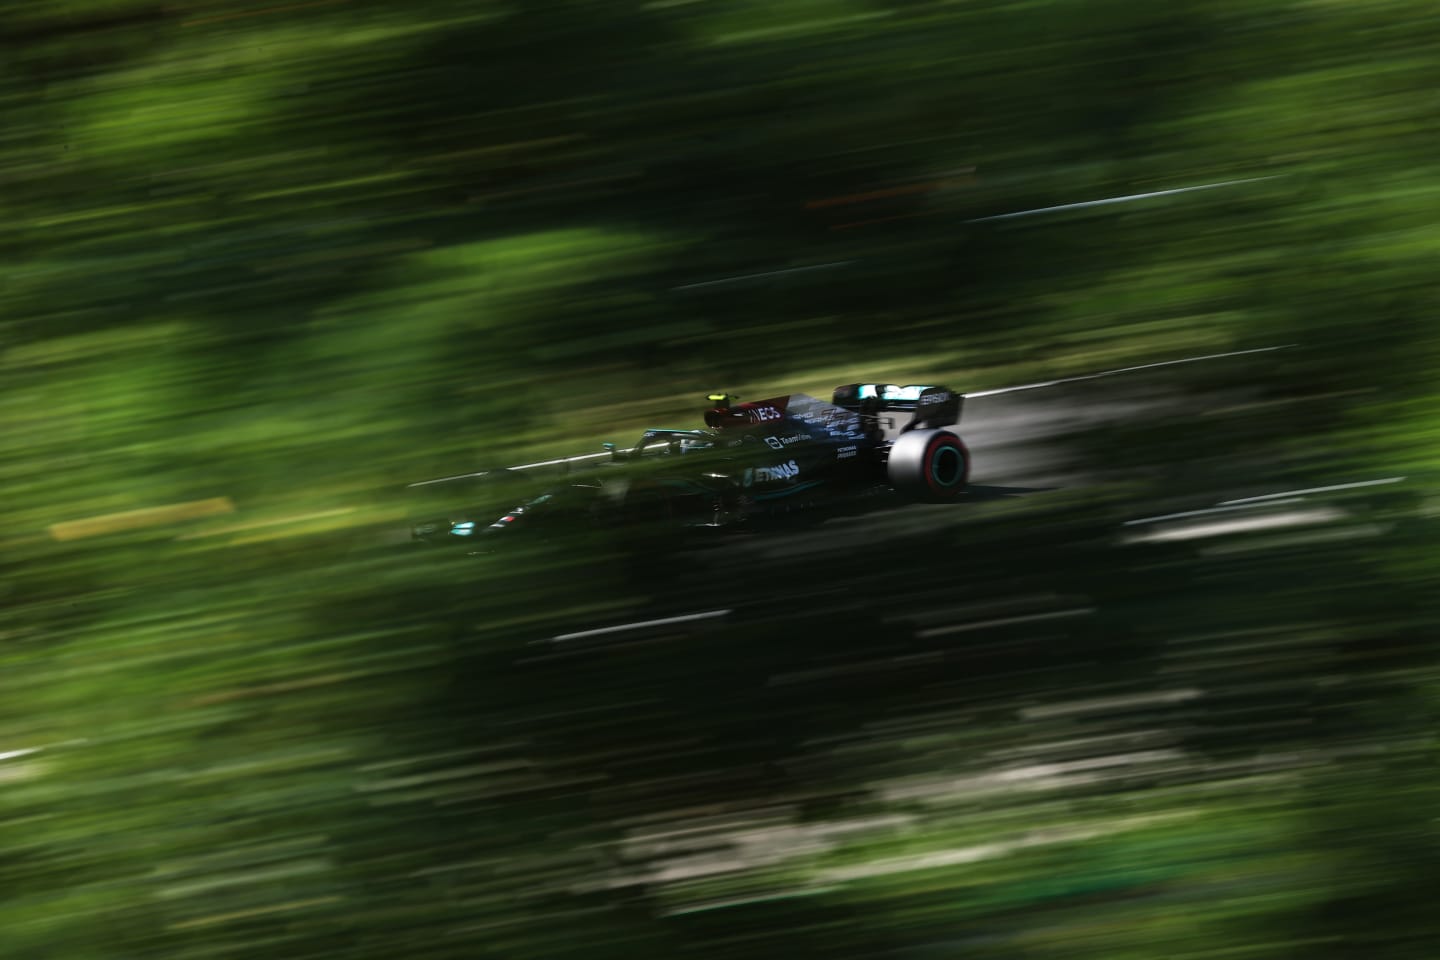 BUDAPEST, HUNGARY - JULY 30: Valtteri Bottas of Finland driving the (77) Mercedes AMG Petronas F1 Team Mercedes W12 during practice ahead of the F1 Grand Prix of Hungary at Hungaroring on July 30, 2021 in Budapest, Hungary. (Photo by Lars Baron/Getty Images)